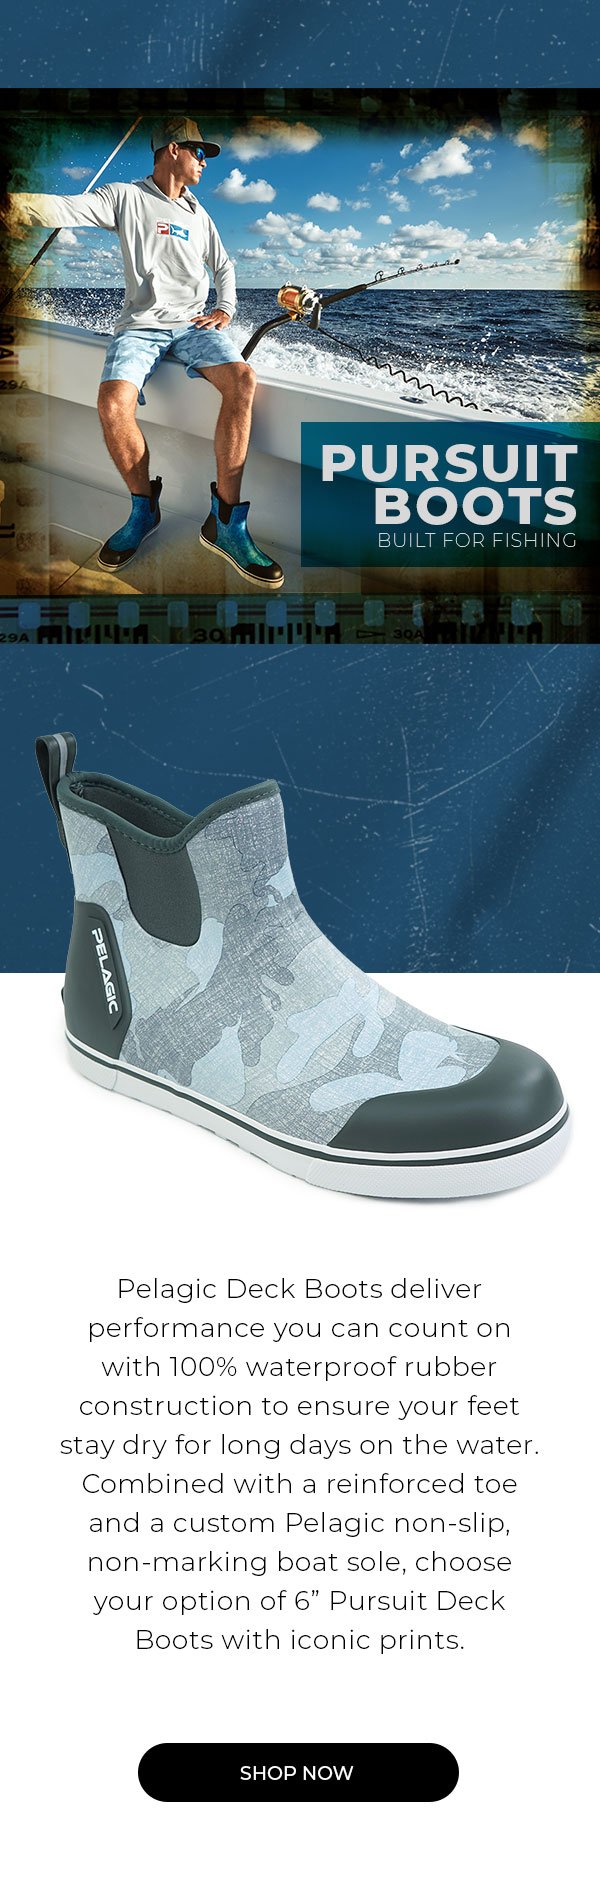 Pelagic: Deck Boots ALL SIZES Available in Fish Camo Green and Light Grey!